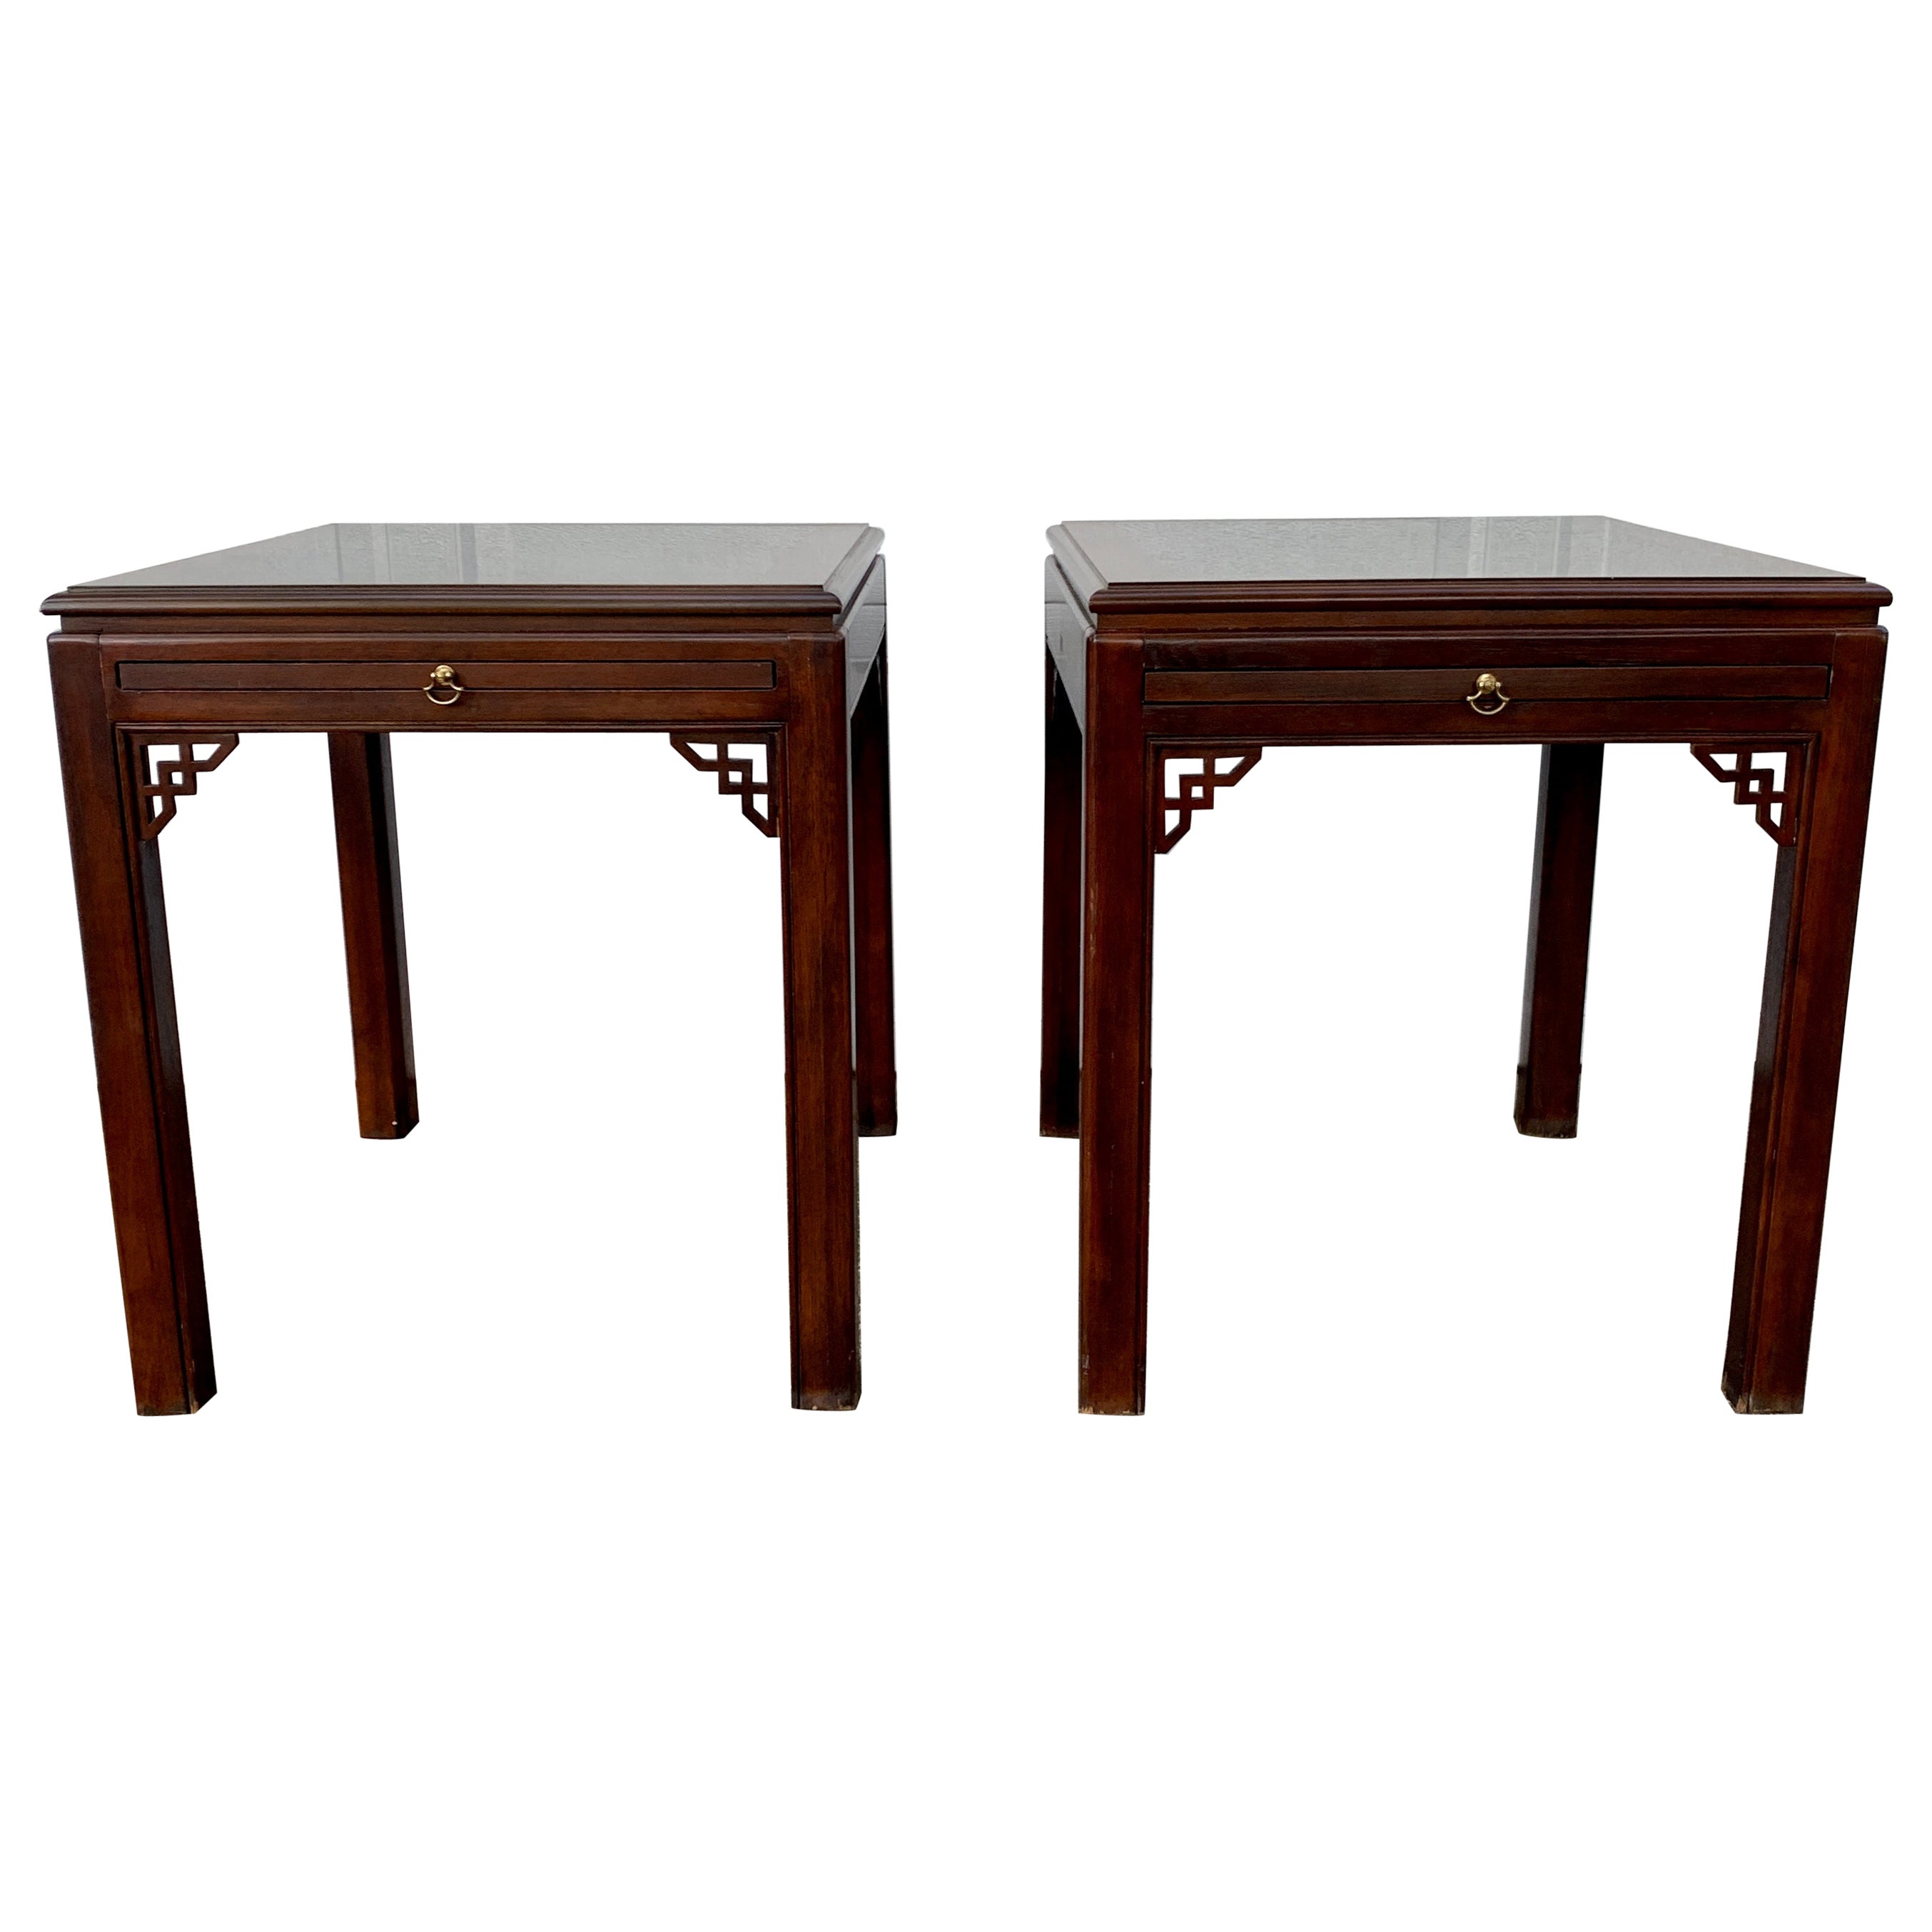 Drexel Heritage English Chippendale Banded Mahogany Side Tables, Pair